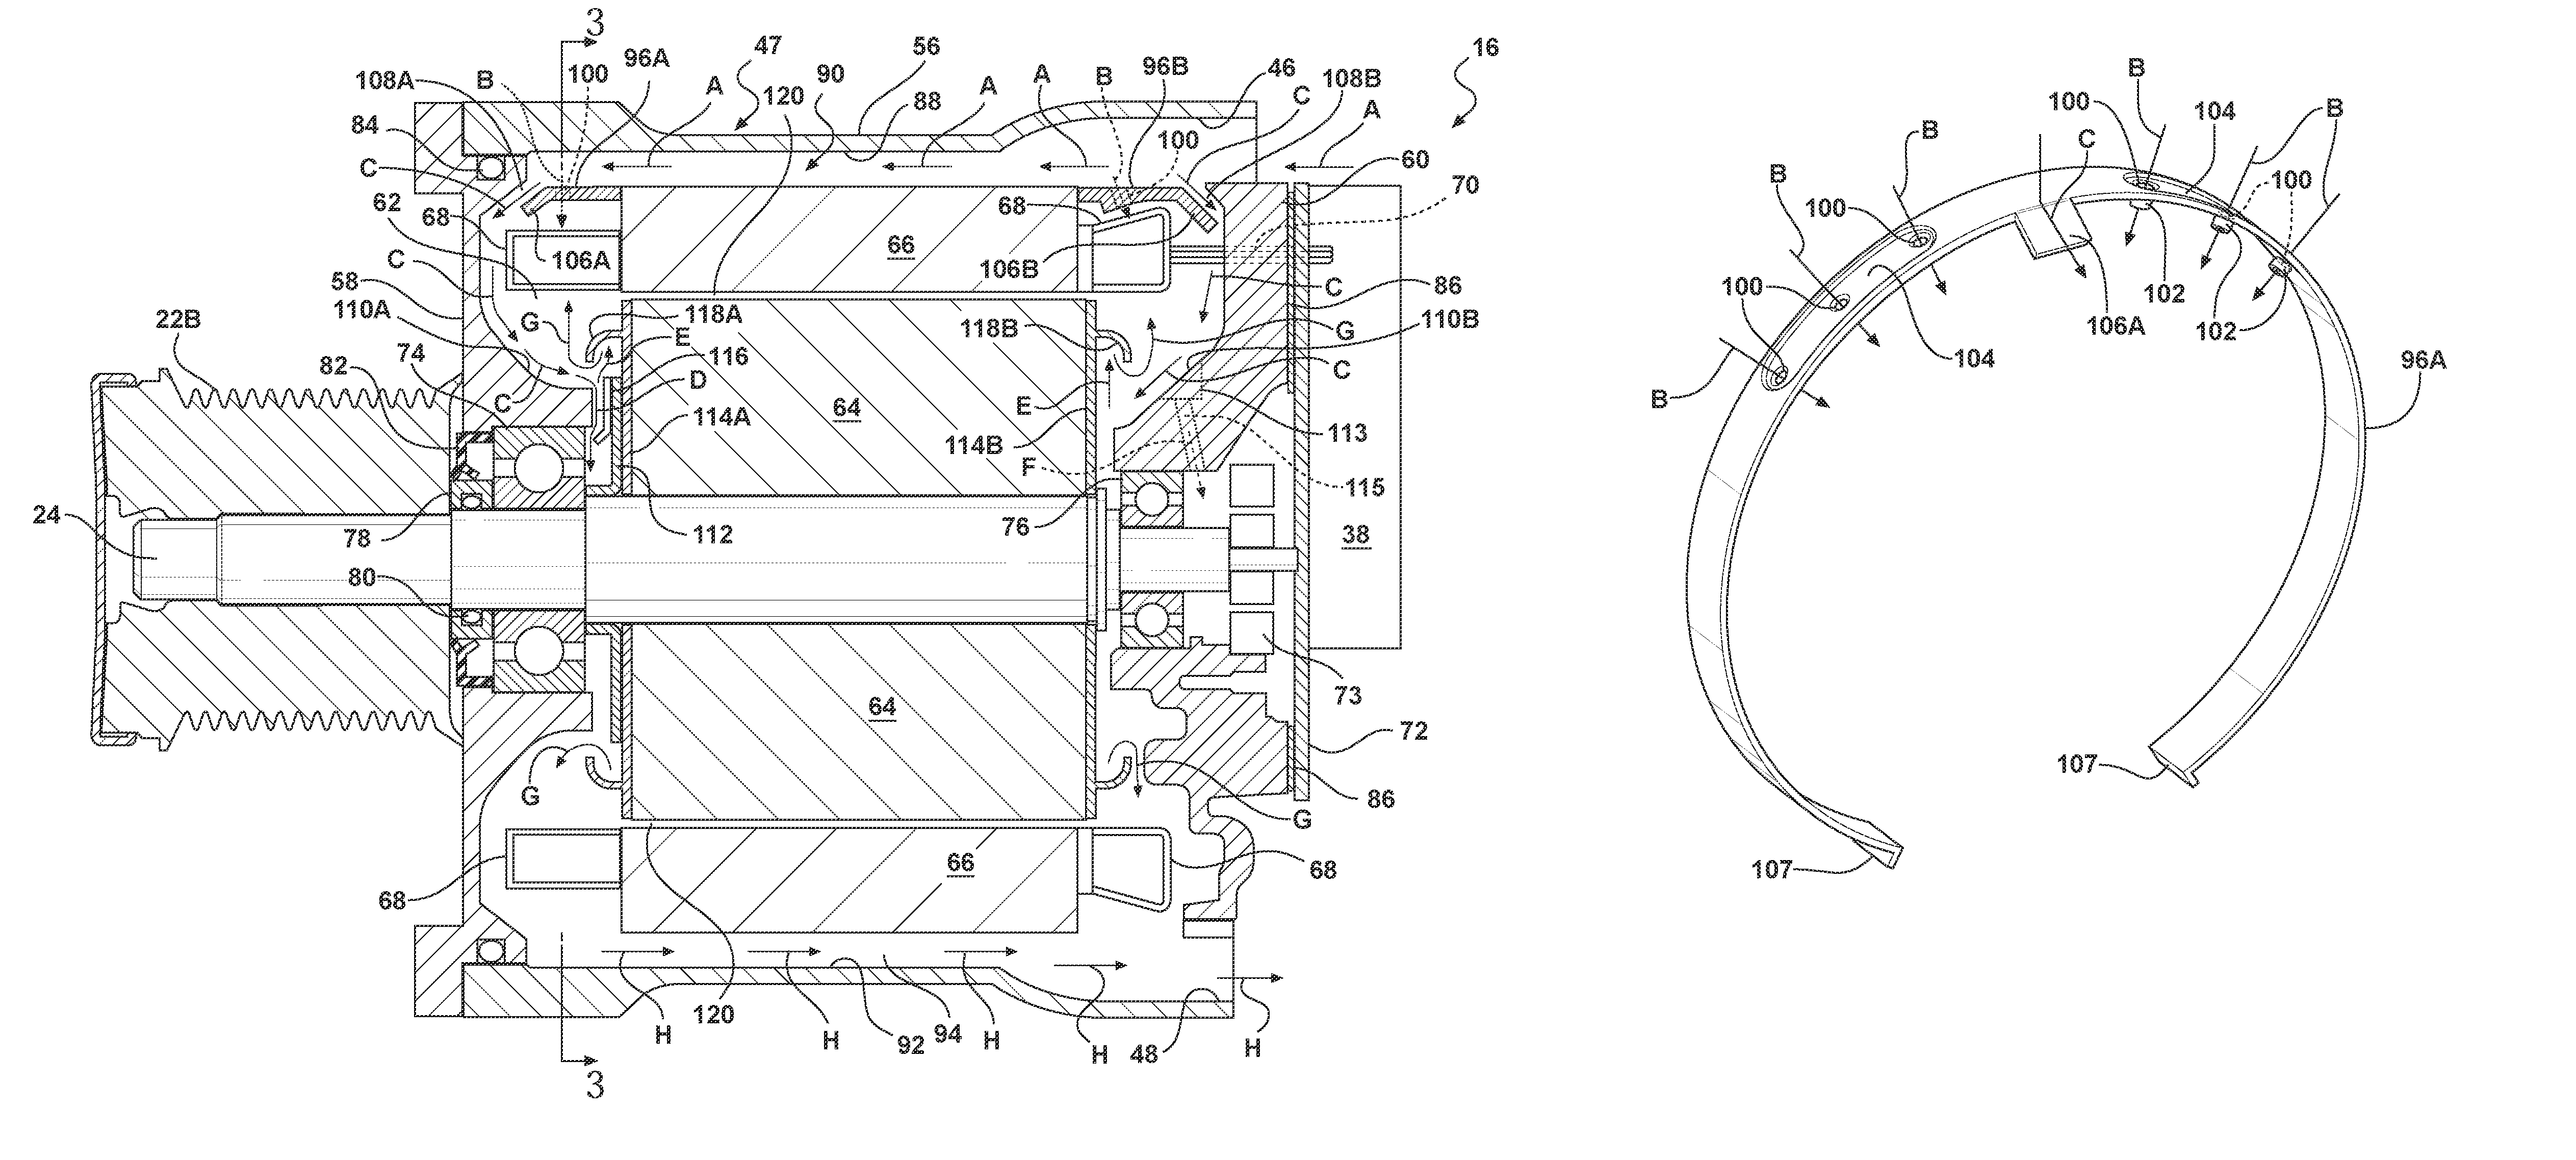 Oil cooled motor/generator for an automotive powertrain